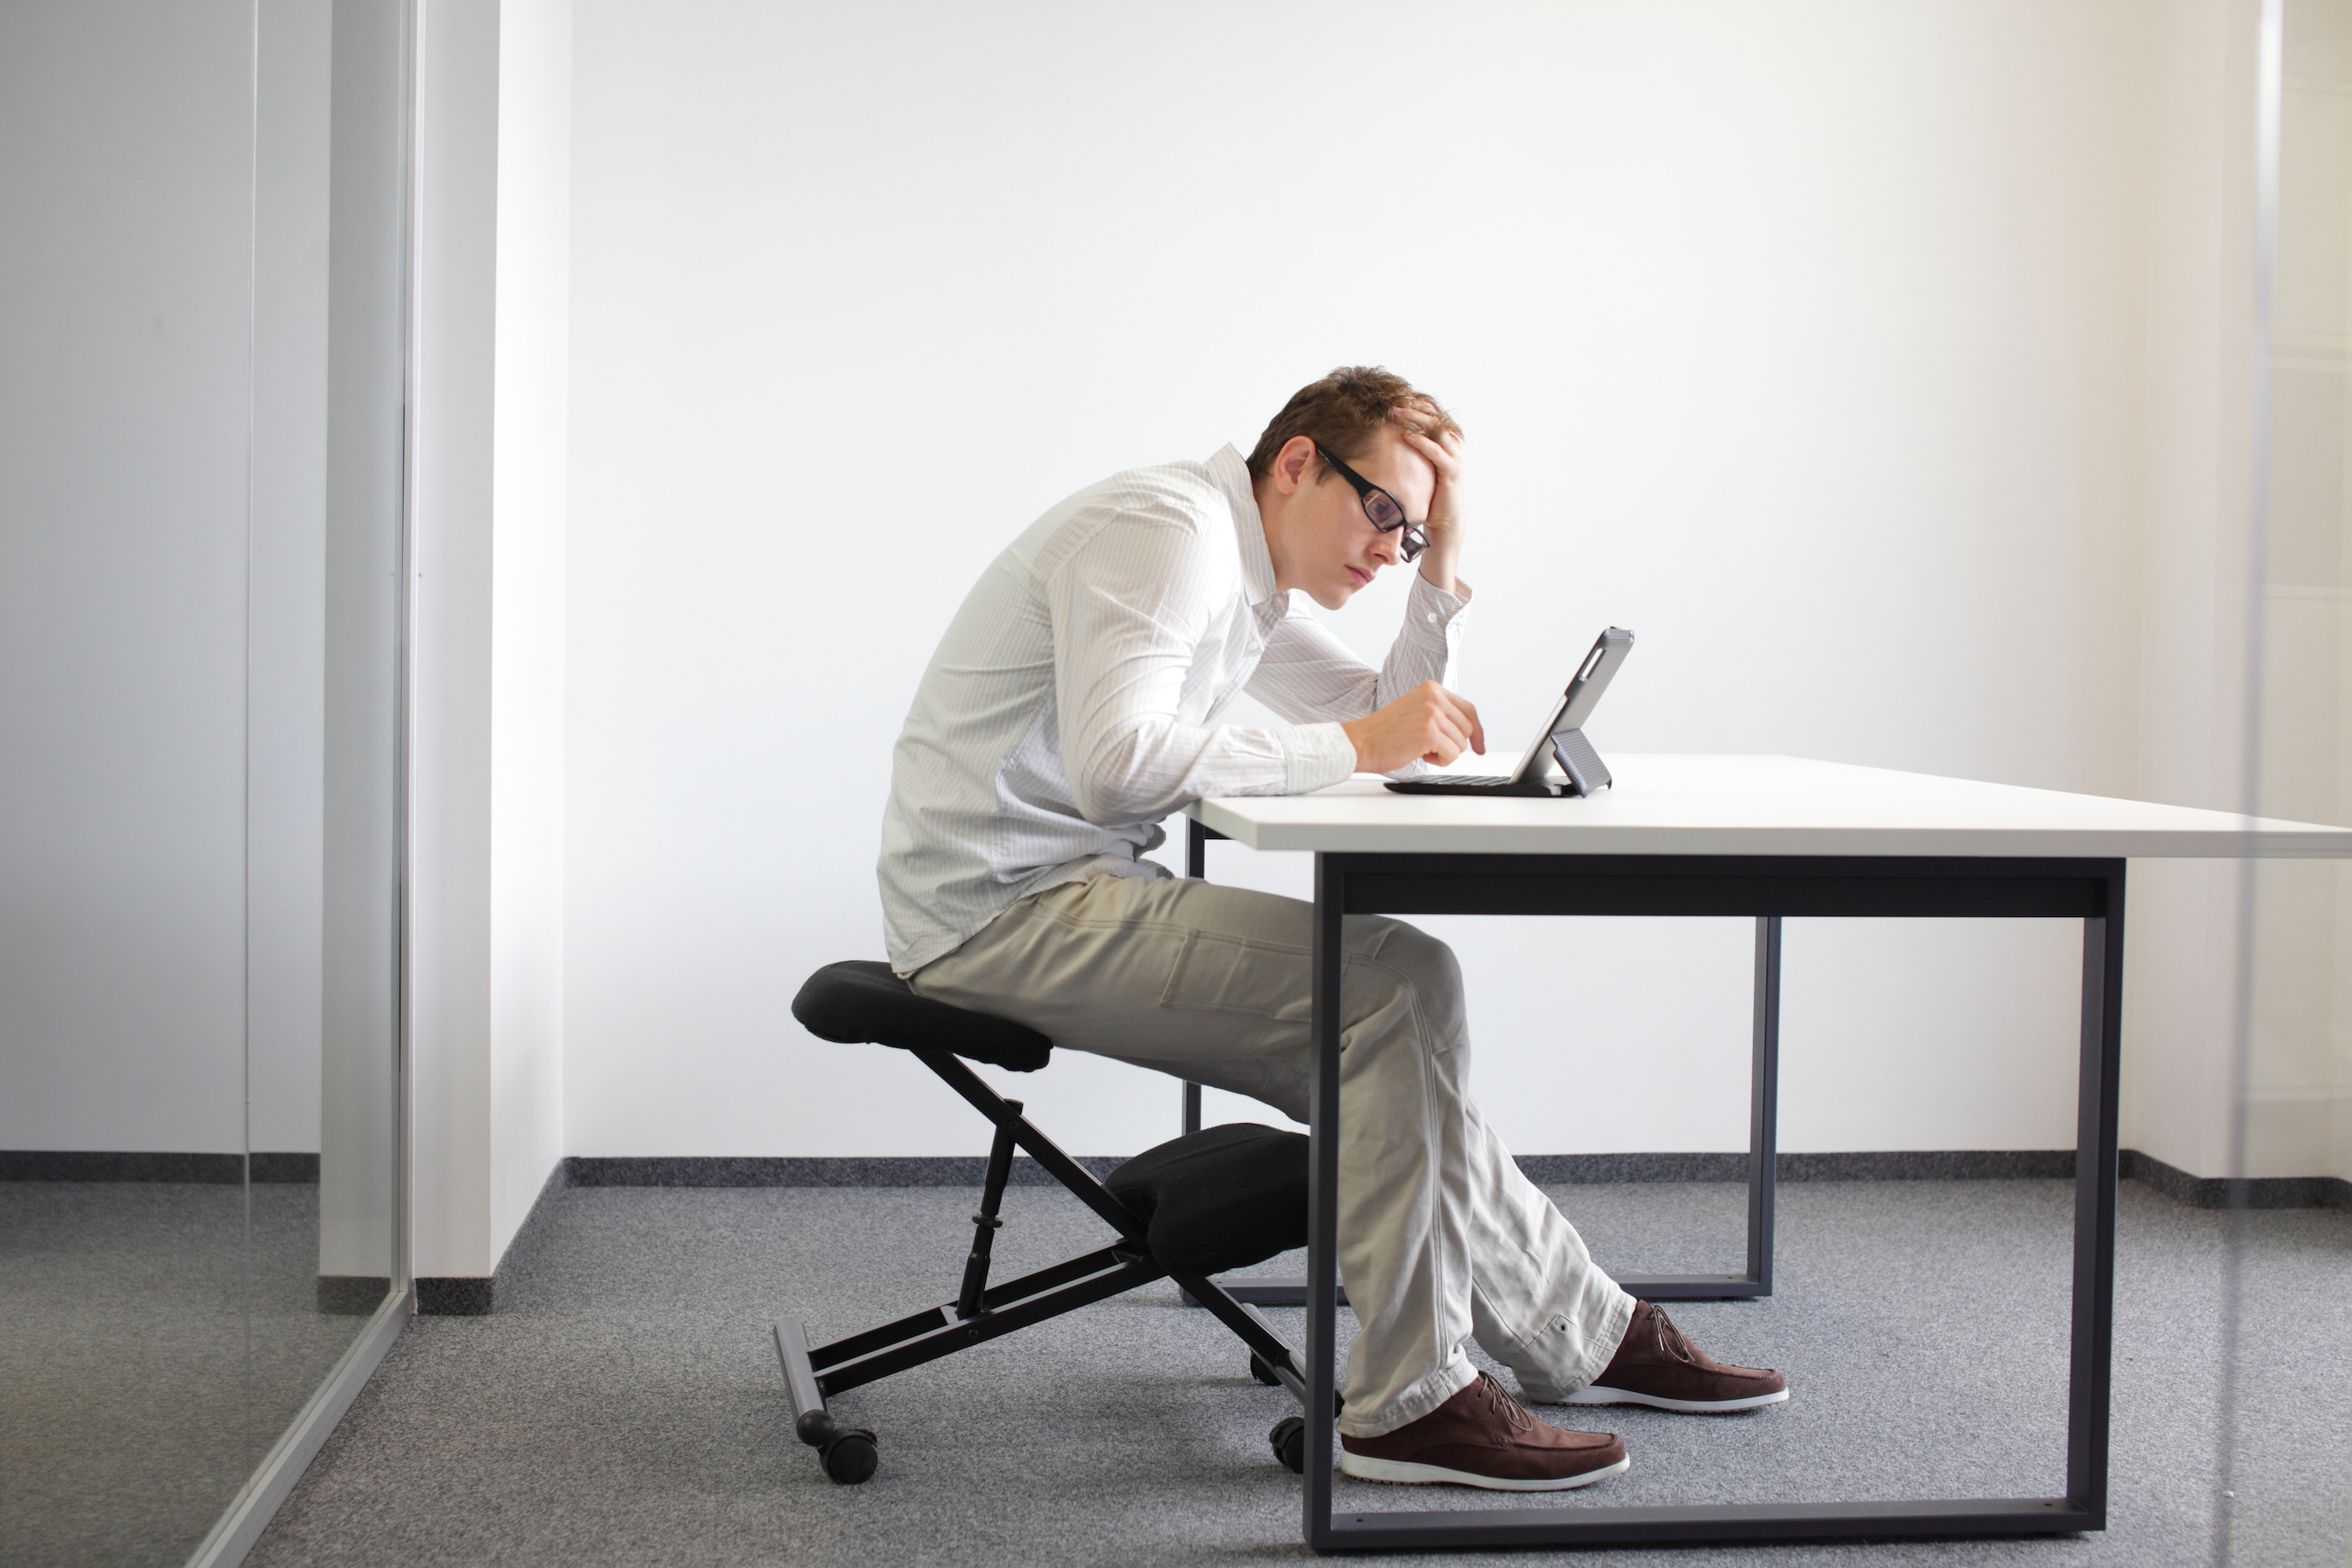 Man slouching over desk with poor posture.